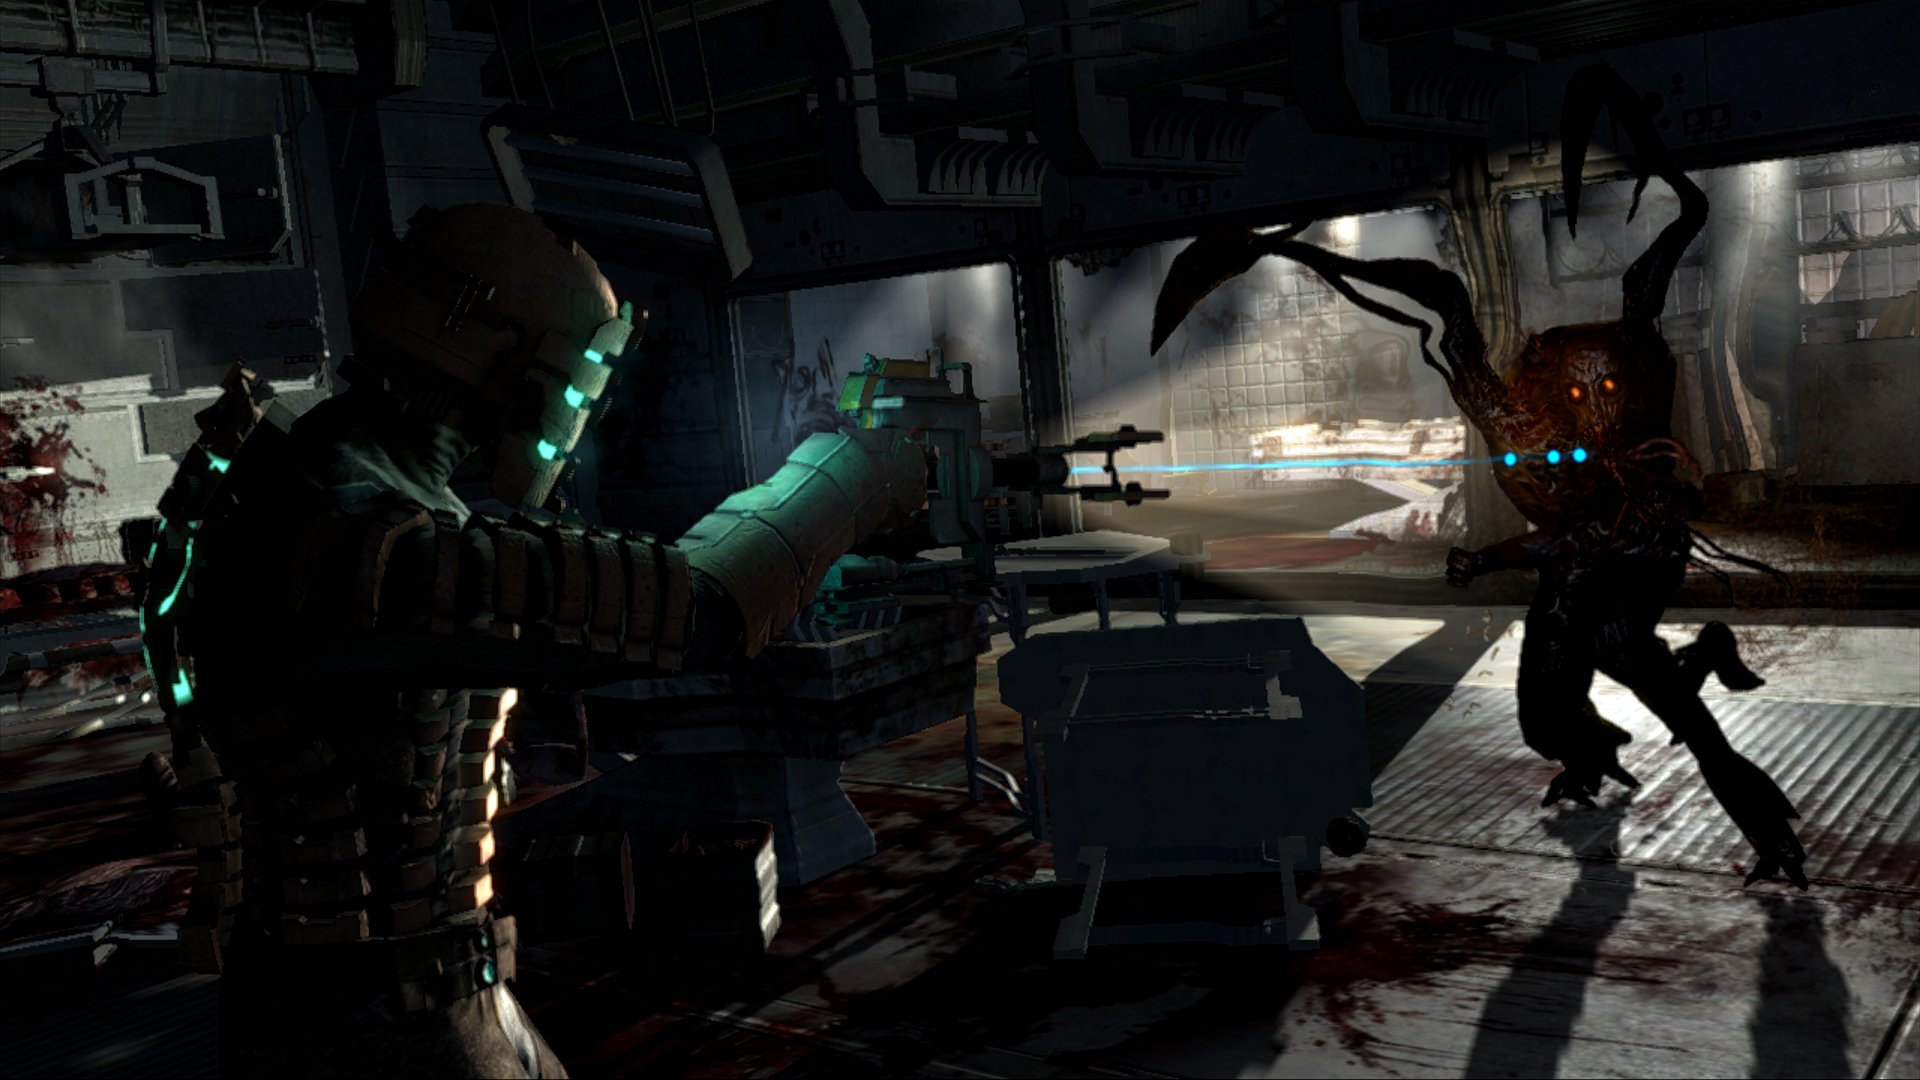 Media asset in full size related to 3dfxzone.it news item entitled as follows: Nuovi screenshots del game Dead Space (Unreal Engine 3.0) | Image Name: news7825_7.jpg